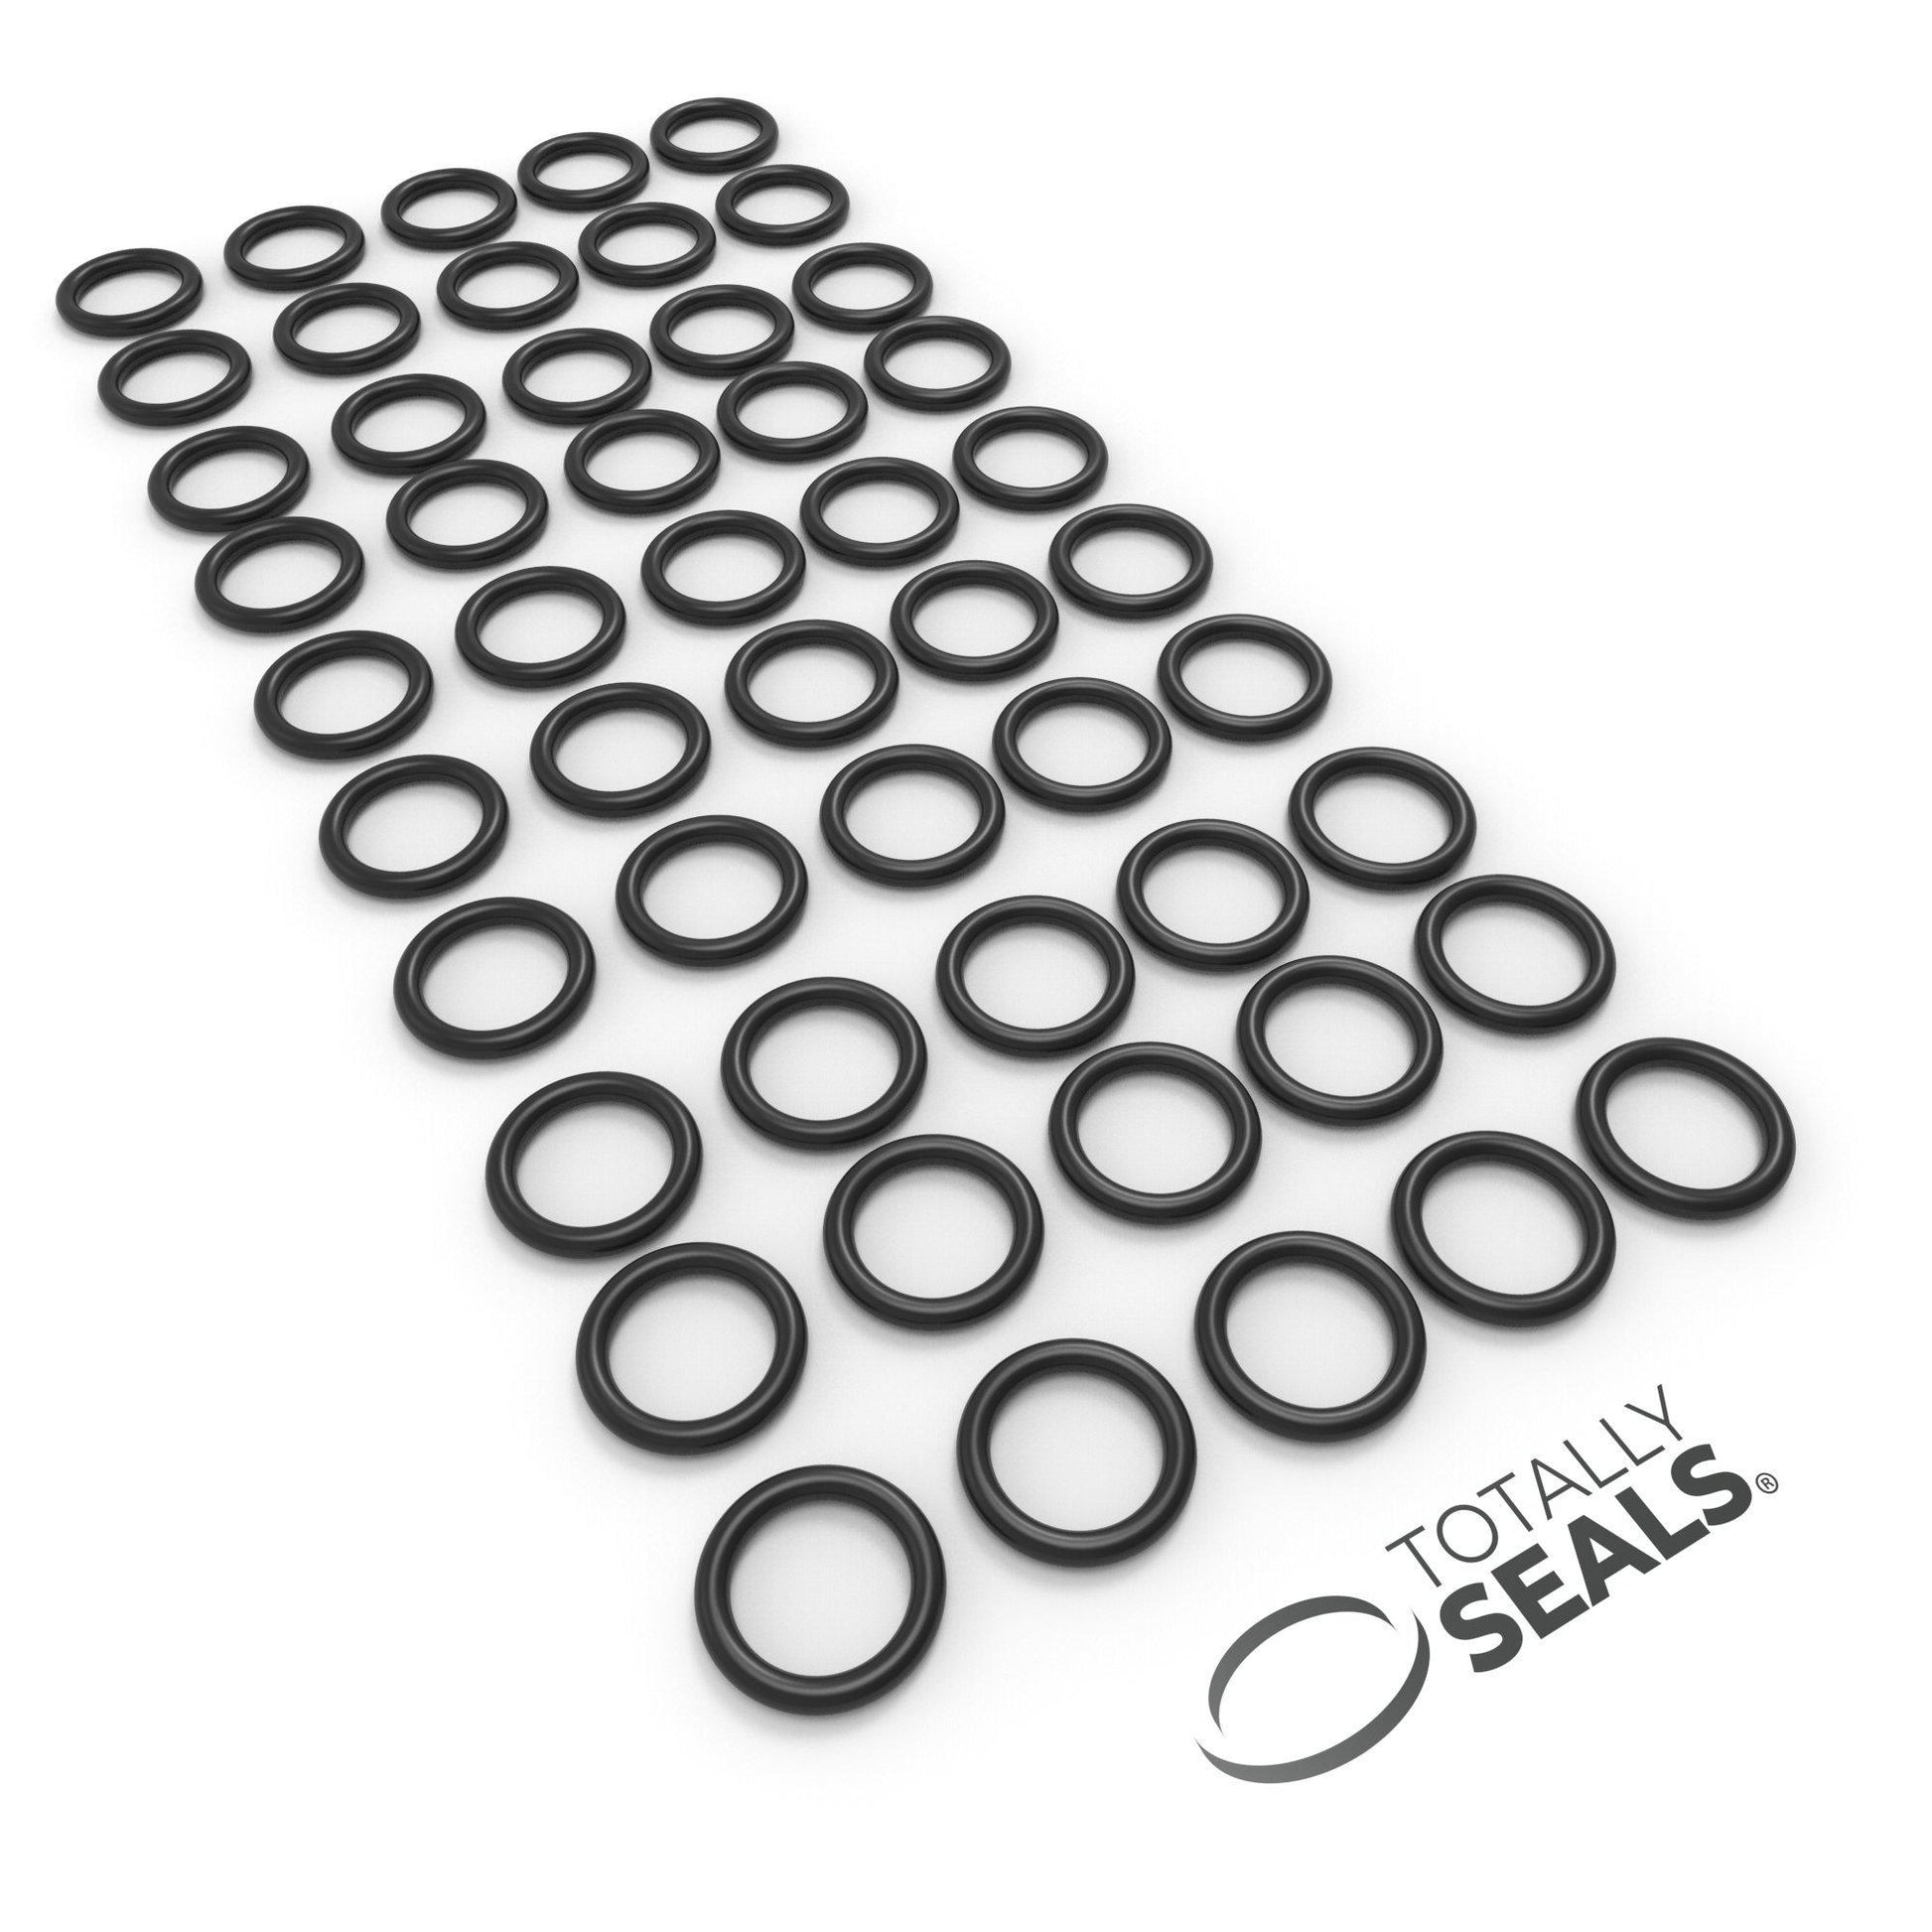 12mm x 1mm (14mm OD) Nitrile O-Rings - Totally Seals®